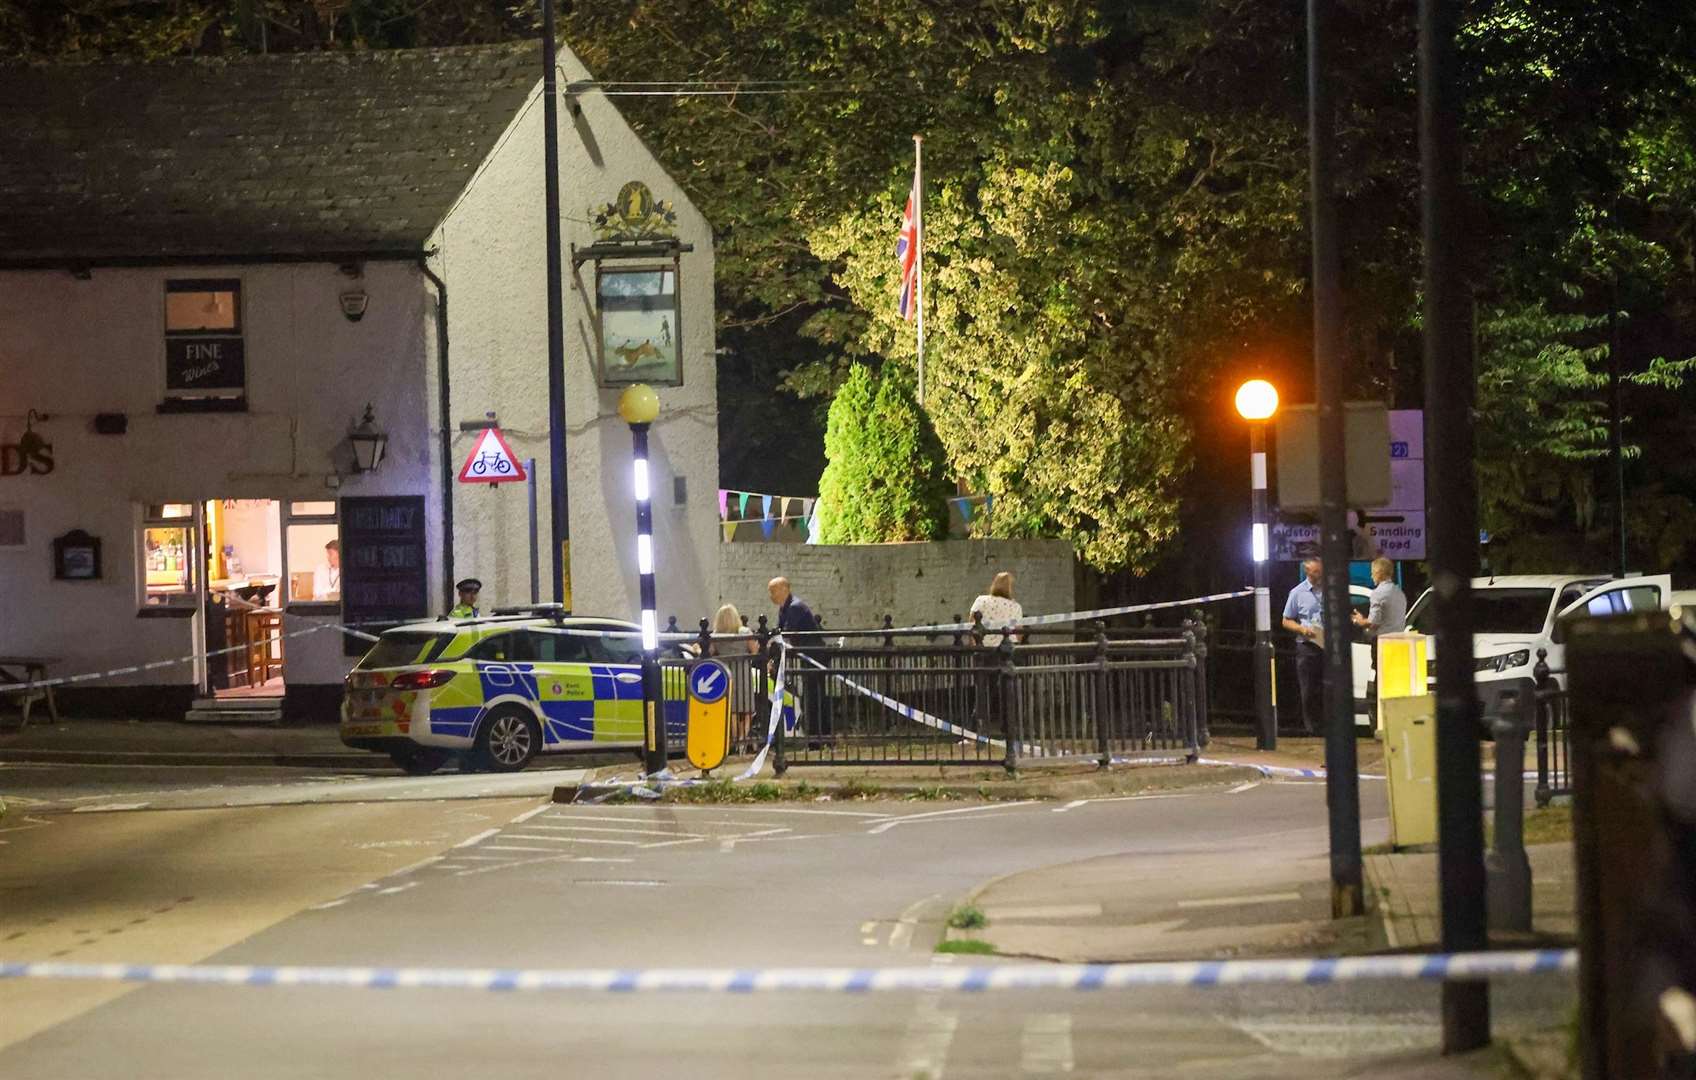 The road remained closed in the aftermath of the murder in Maidstone. Picture: UKNIP